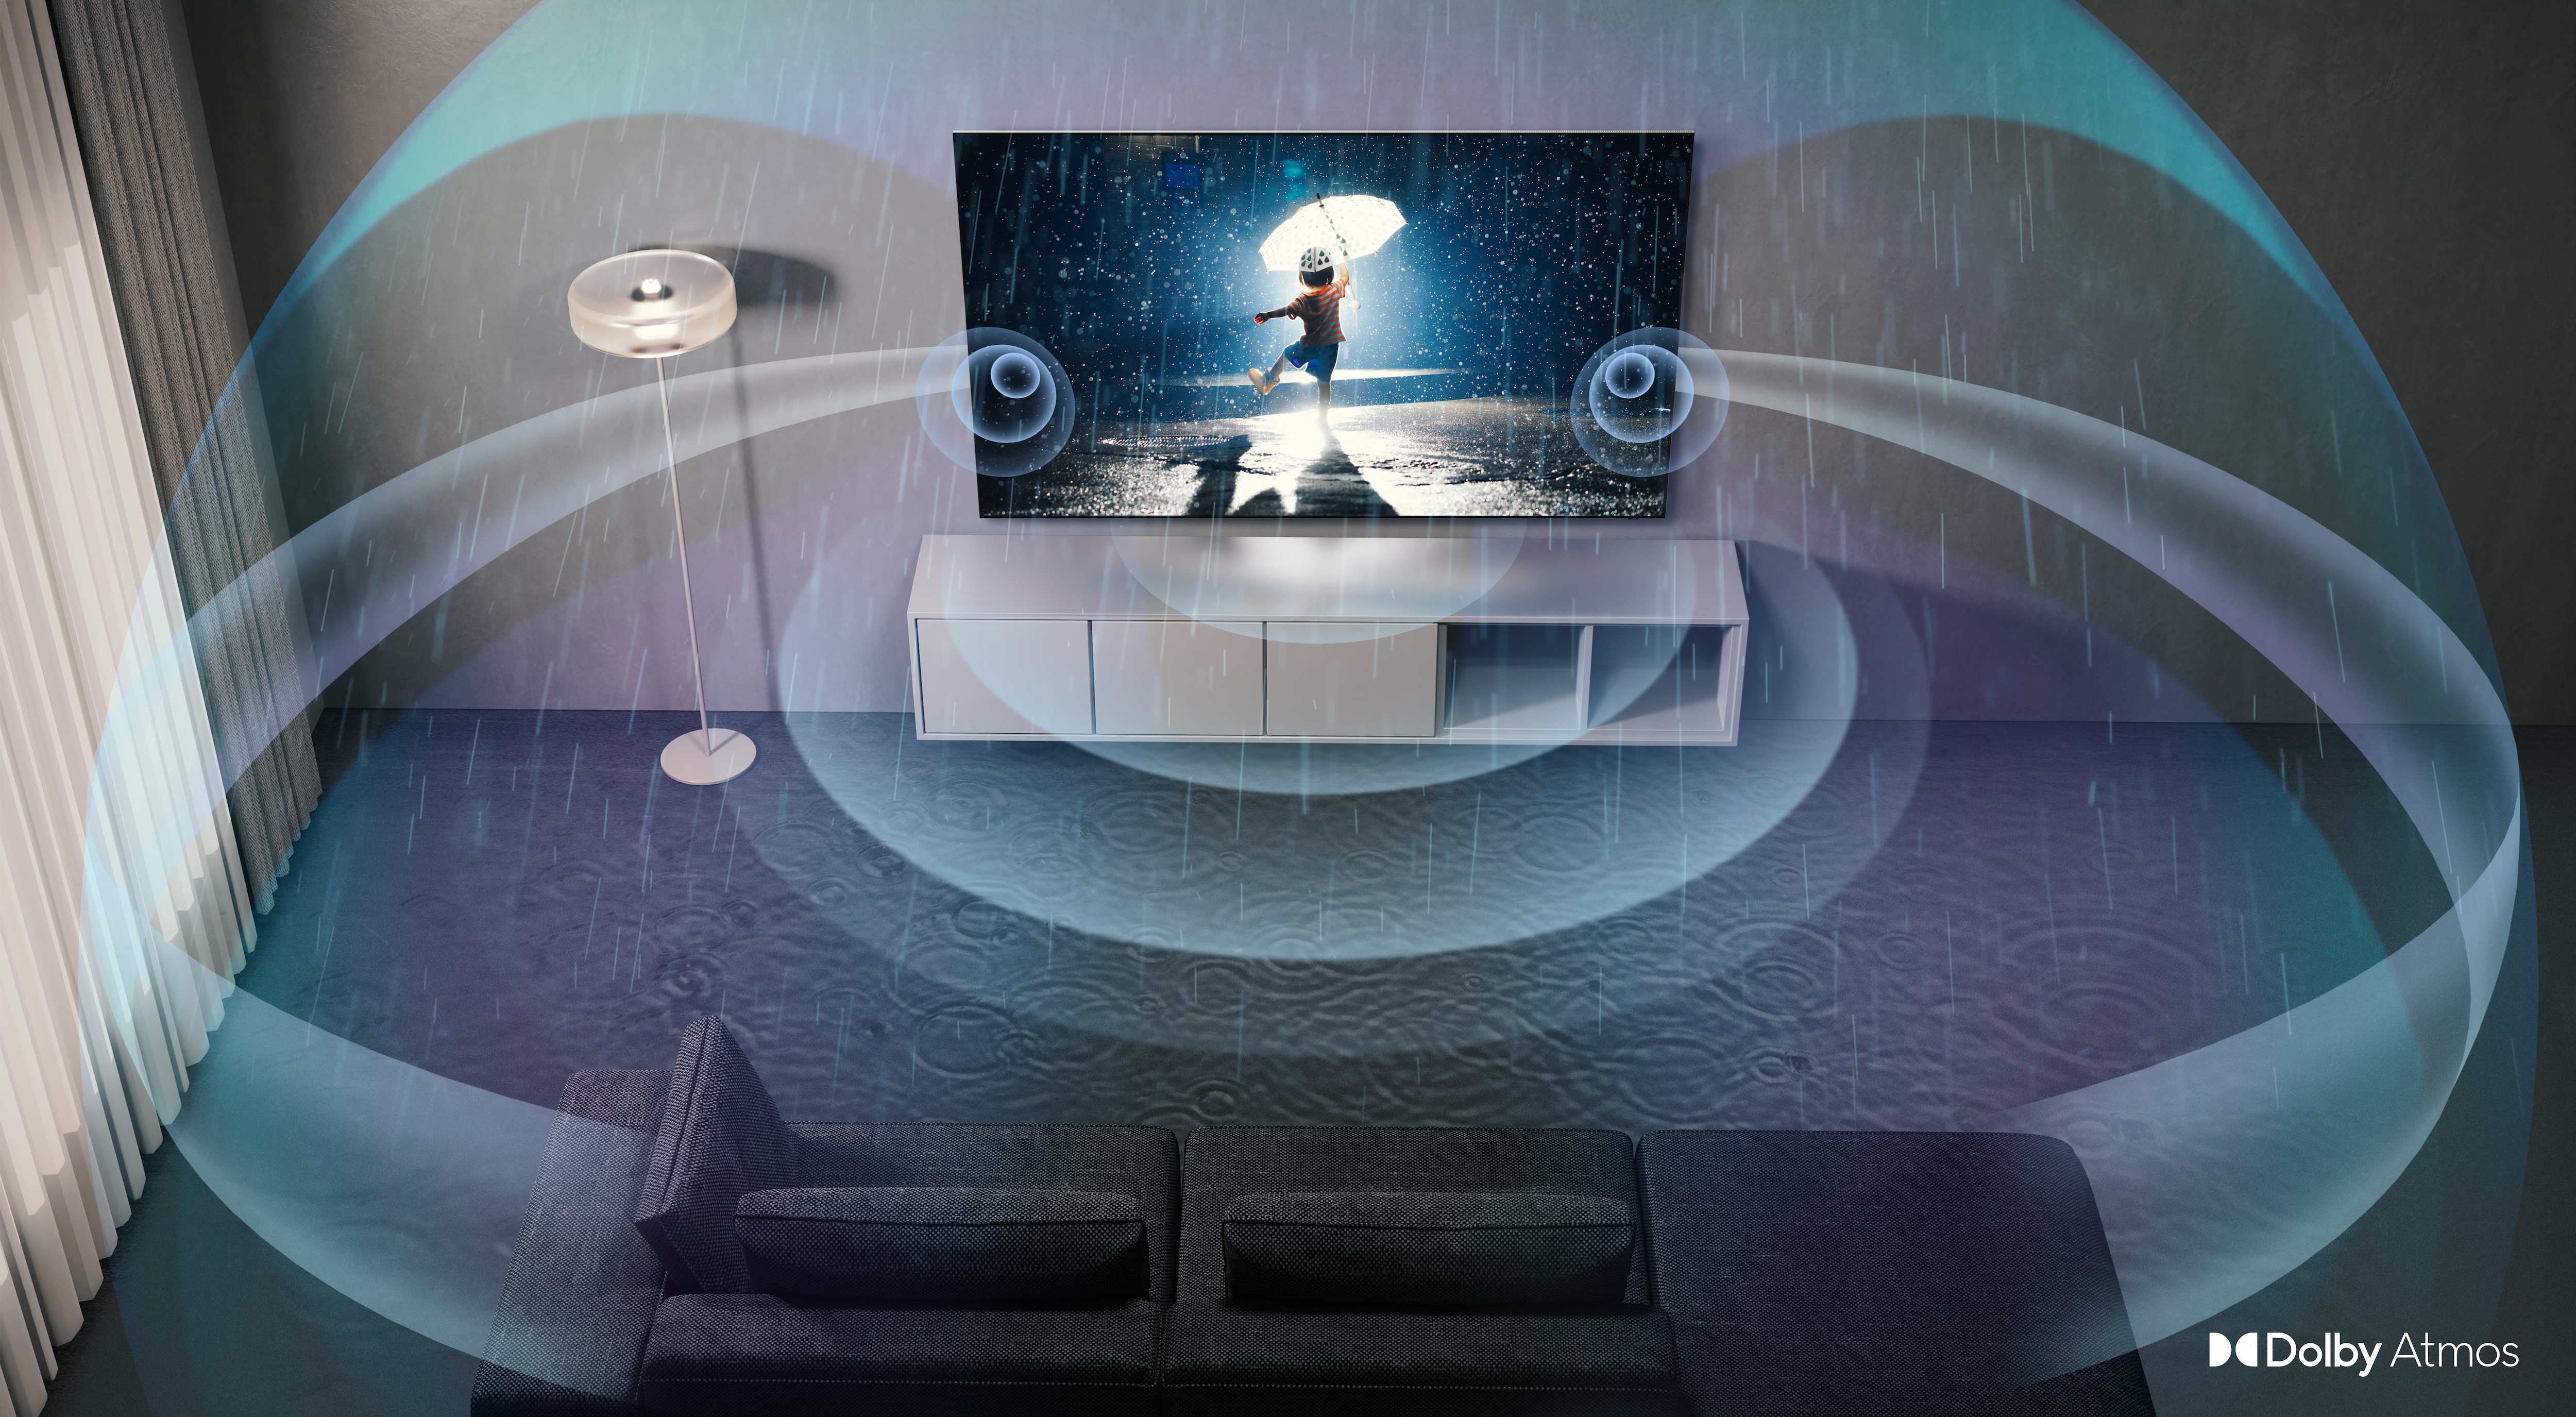 Dolby Atmos experience with top channel speakers